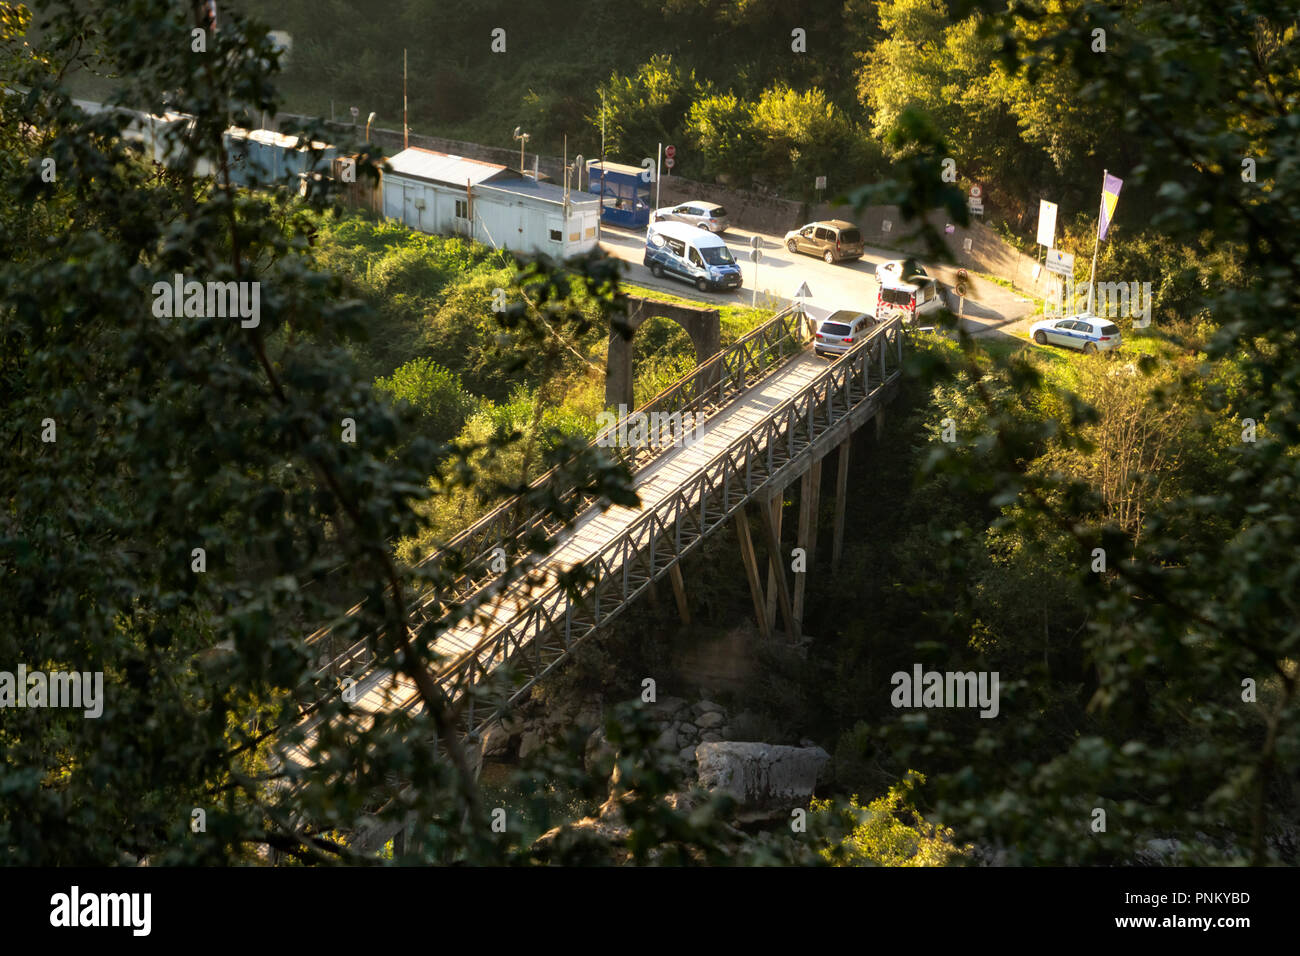 VUCEVO, BOSNIA AND HERZEGOVINA - AUGUST 18 2017: Border crossing point between Montenegro and Bosnia and Herzegovina where the River Tara forms the bo Stock Photo